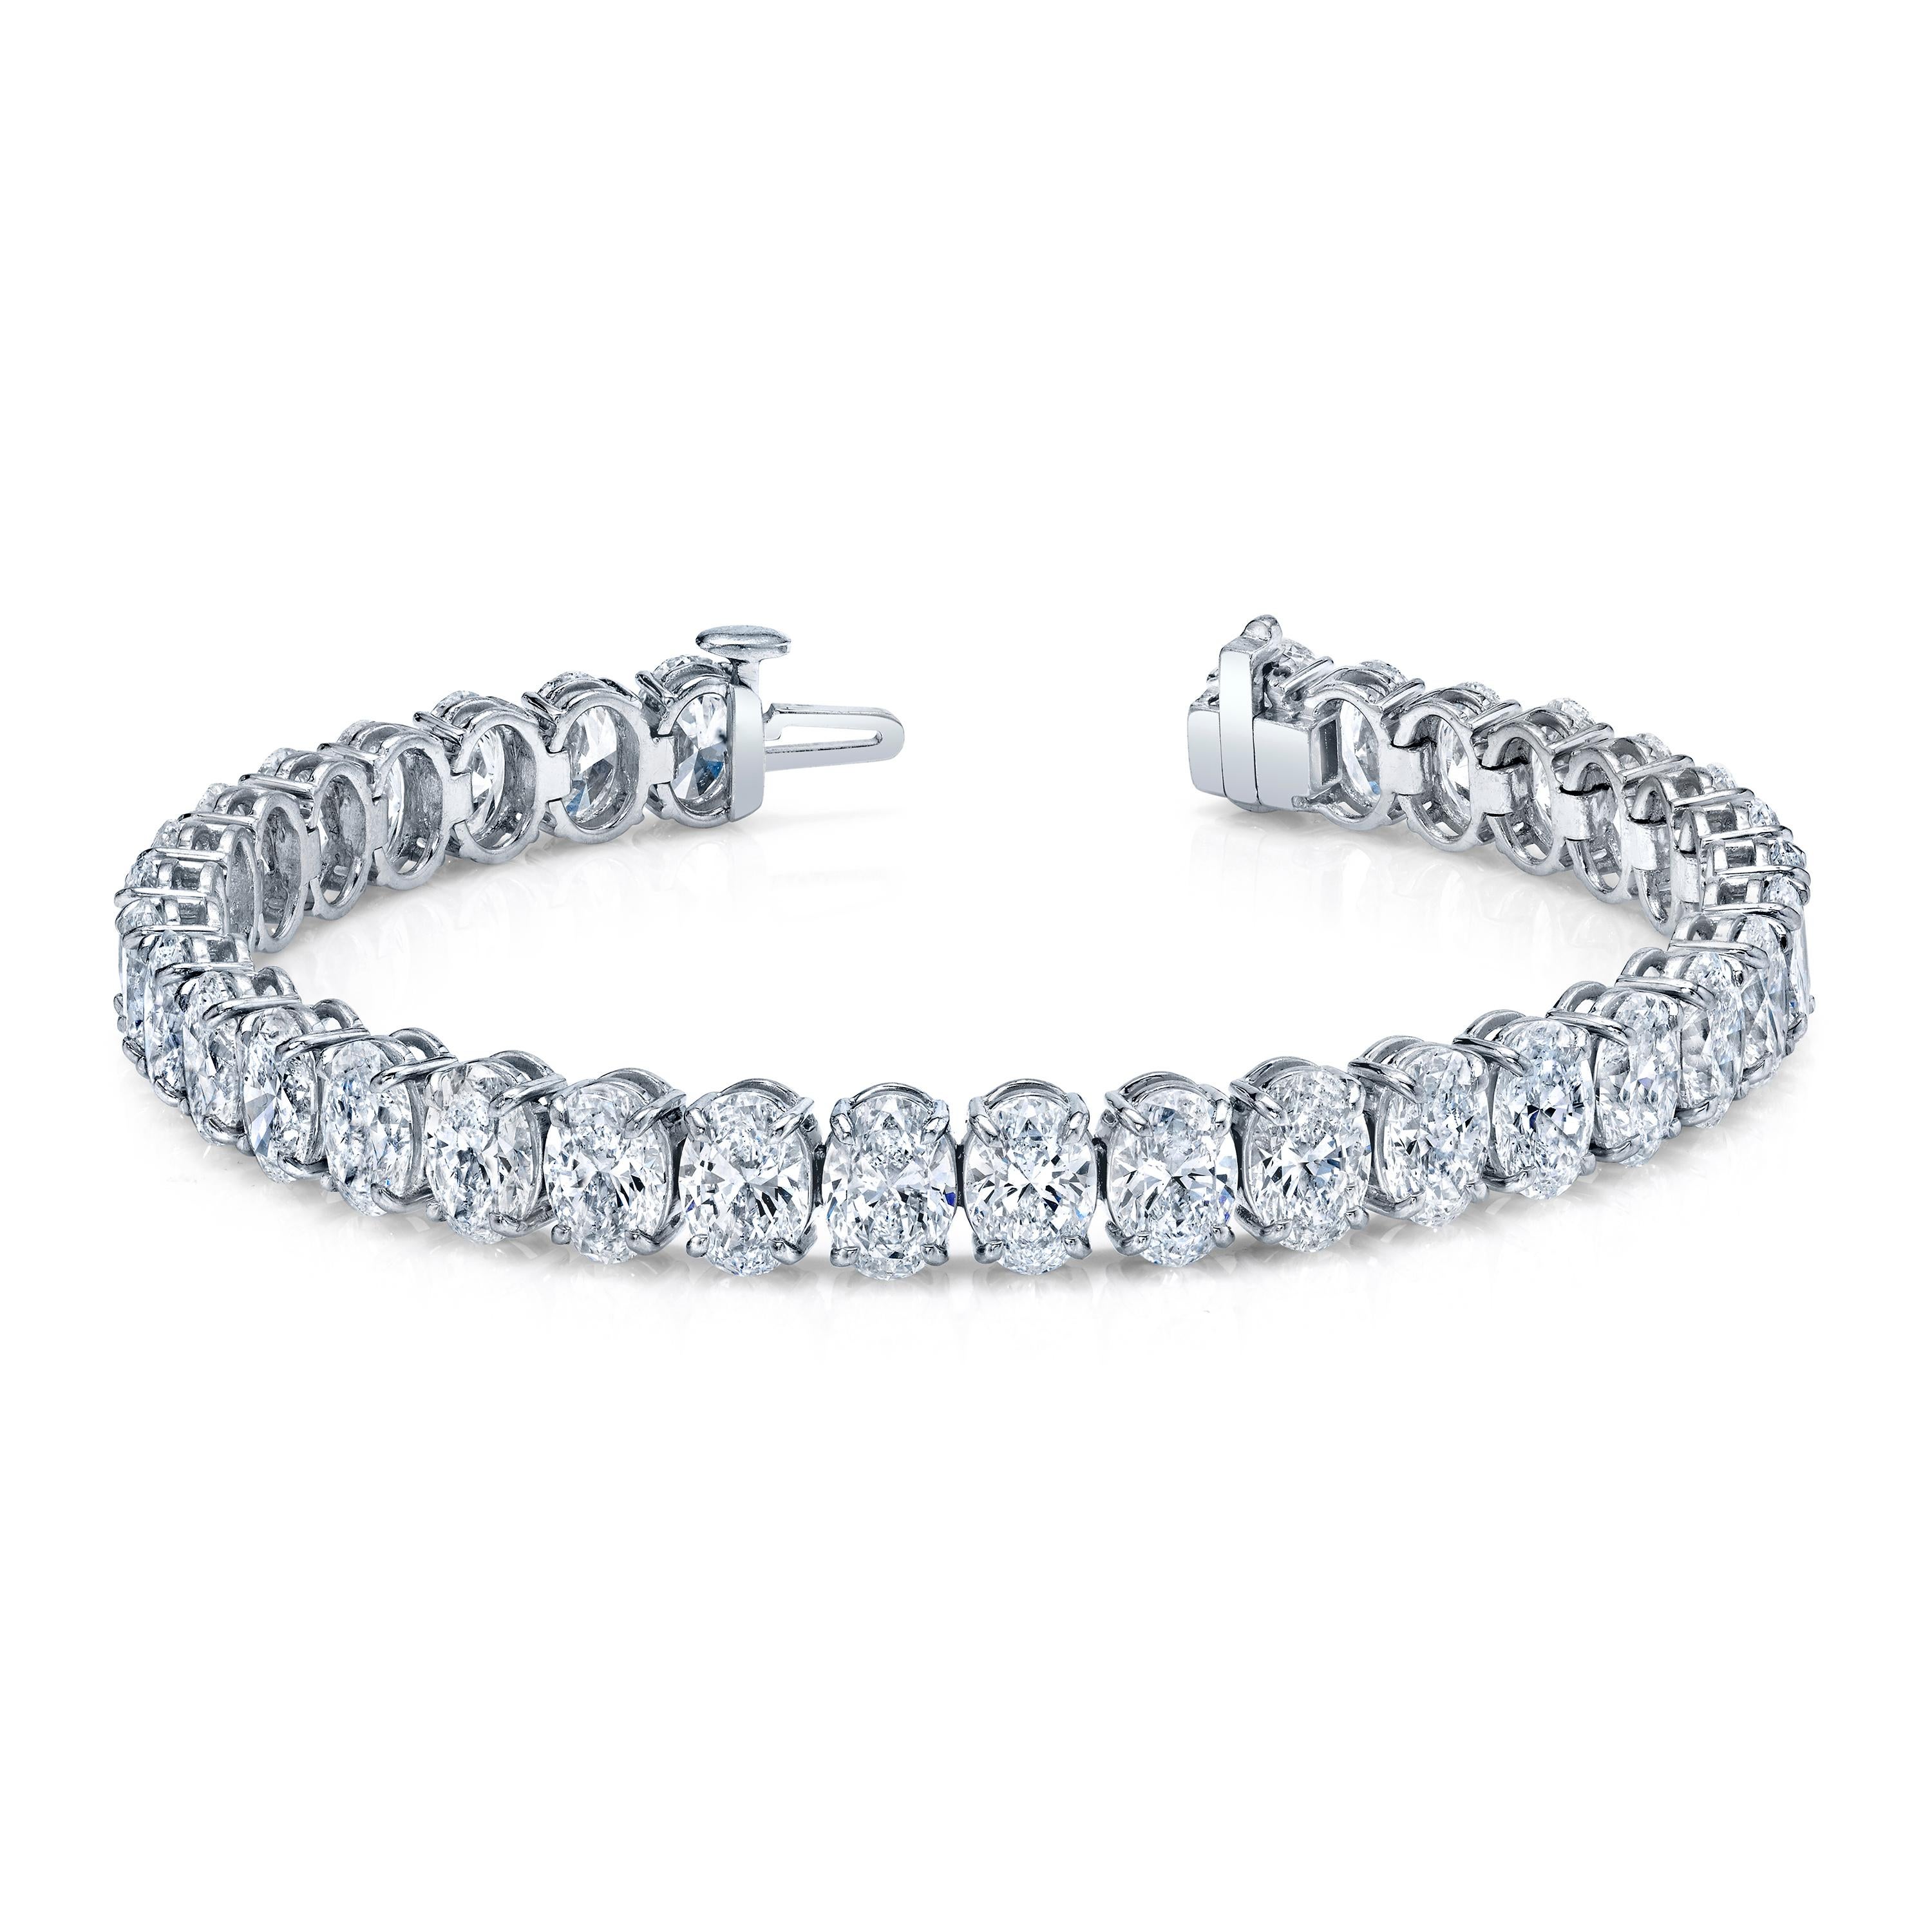 Indulge in luxury with our exquisite platinum bracelet featuring 35 dazzling oval-cut diamonds totaling 24.80 carats. Each diamond is expertly set in a straight line with a secure 4-prong setting, ensuring both elegance and durability. With a range